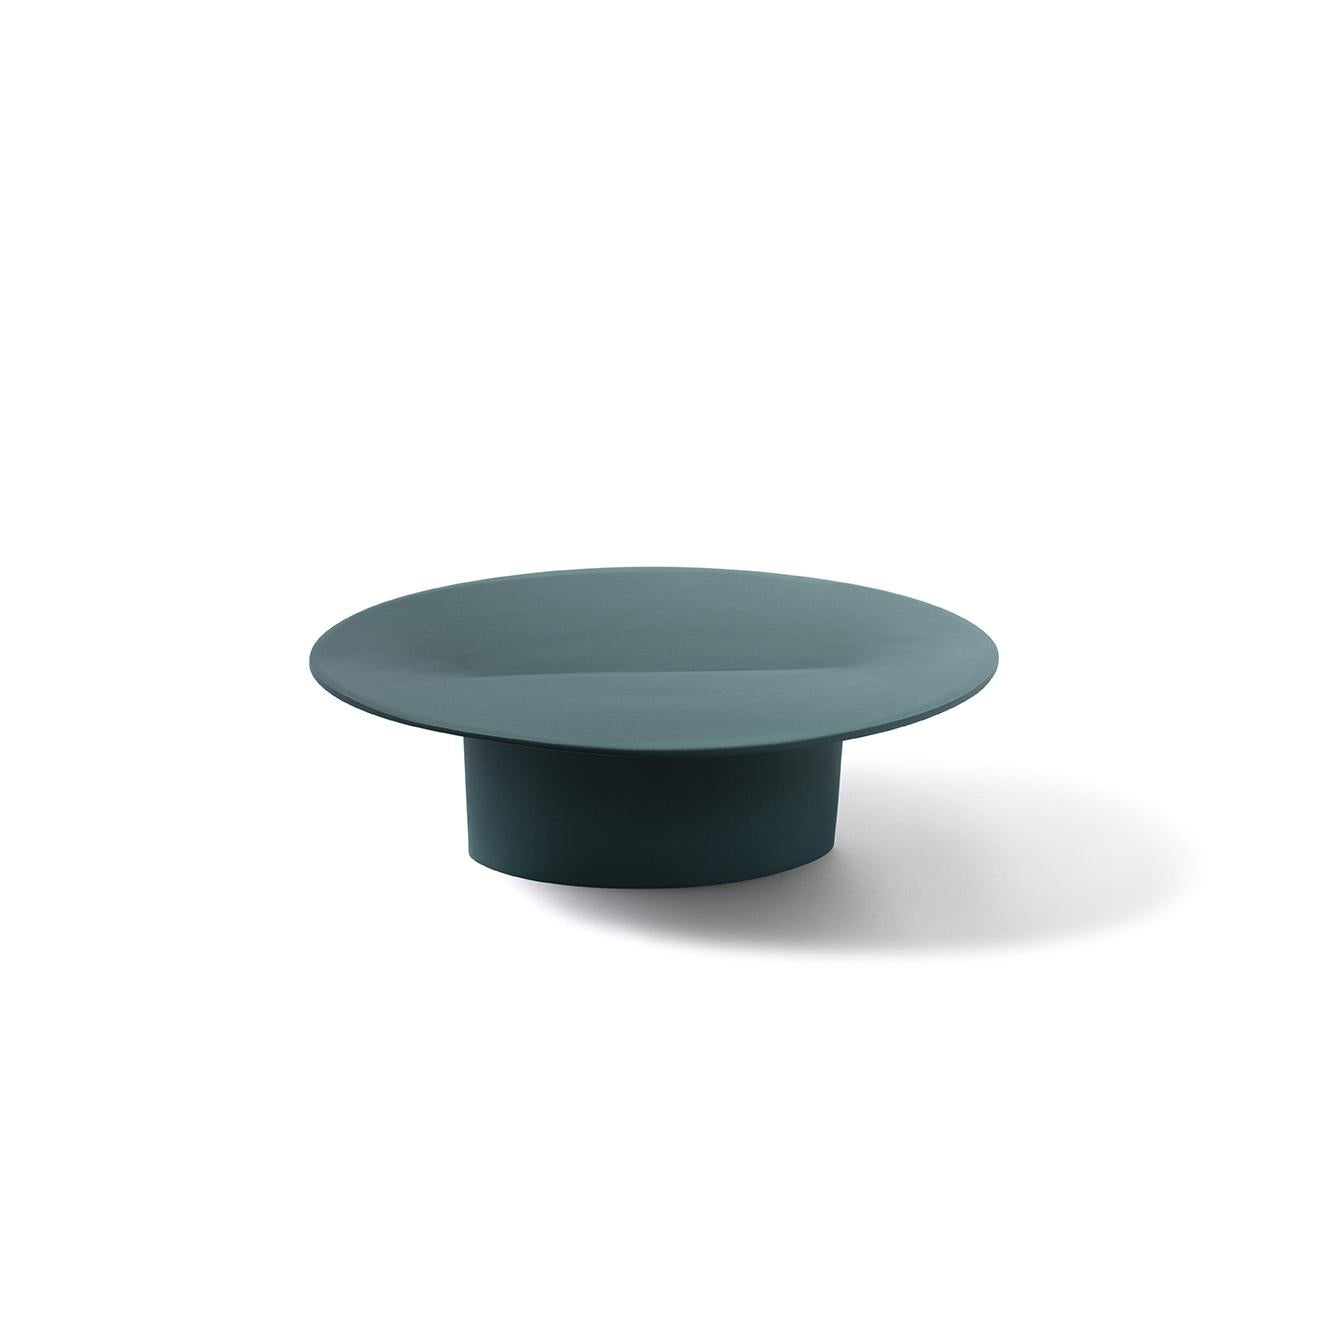 Tellina is a riser or cake stand in ceramic designed by Chiara Andreatti for Paola C., and it is part of the collection Coquille, a family composed of cake stands, centerpieces, fruit bowls and vases, inspired by natural shapes that recall stylized